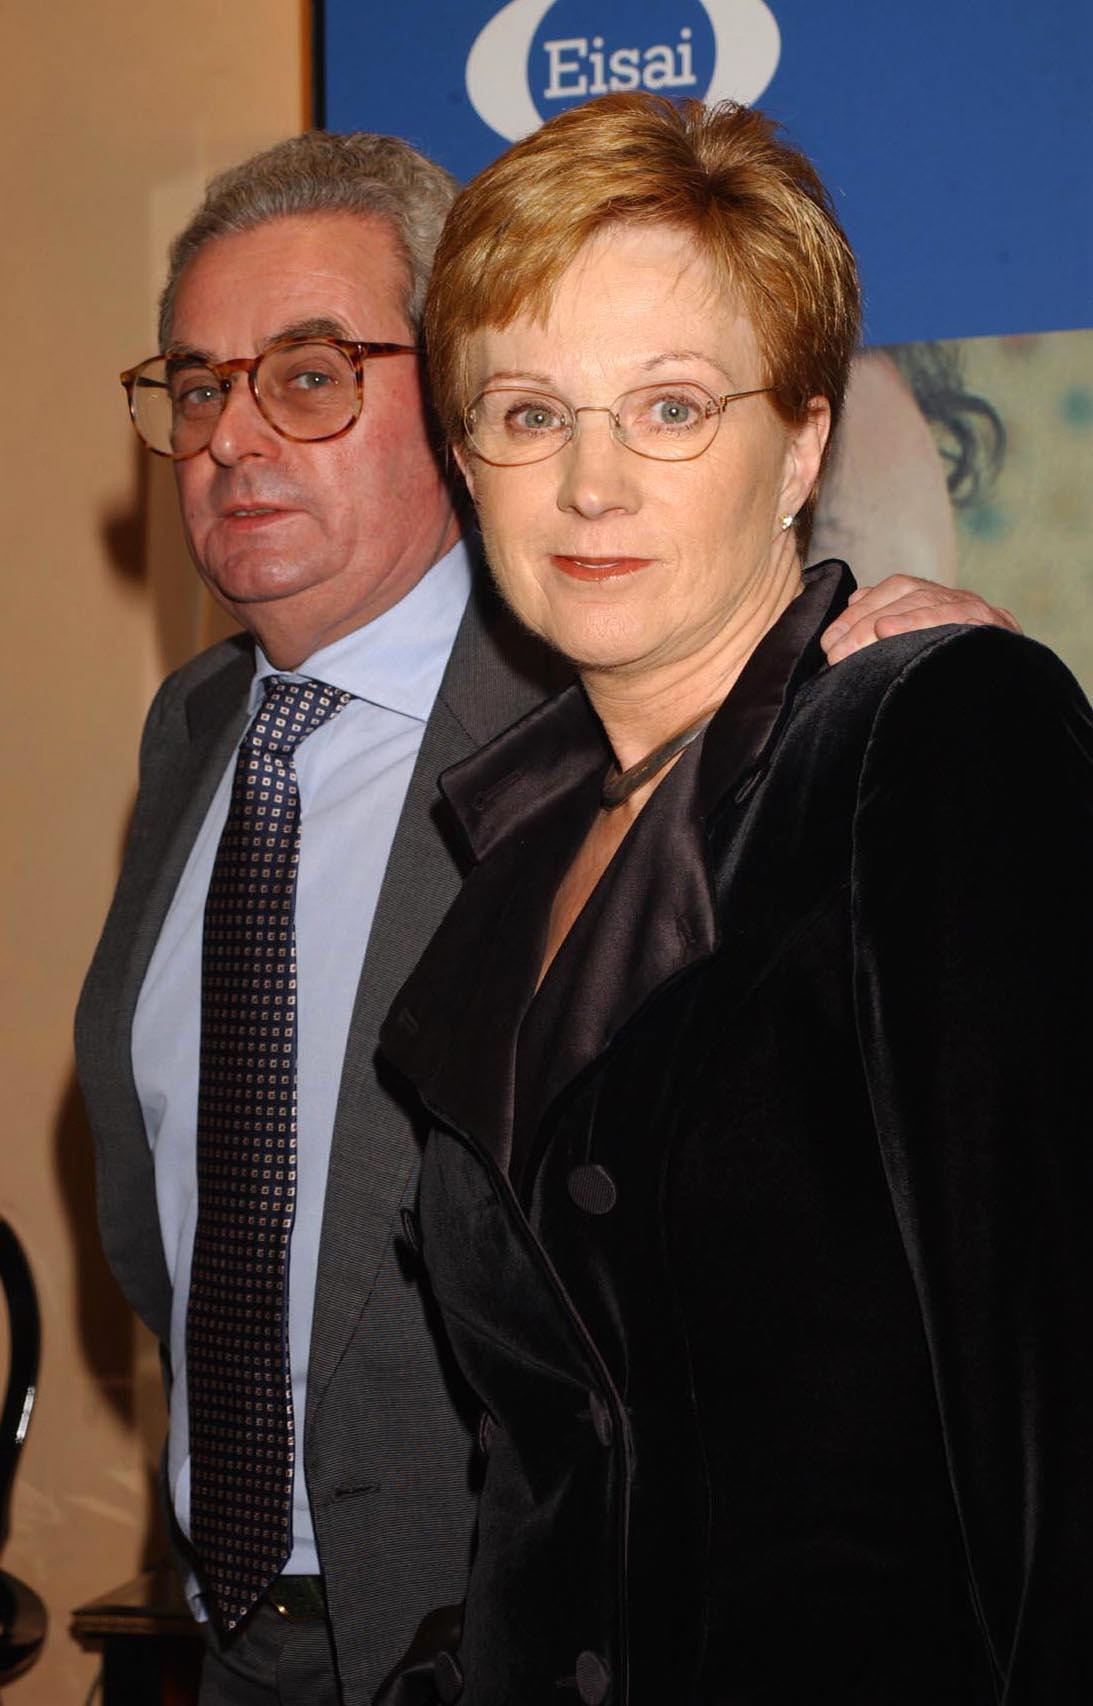 Anne Robinson with her then husband, John Penrose in 2002 (Yui Mok/PA)